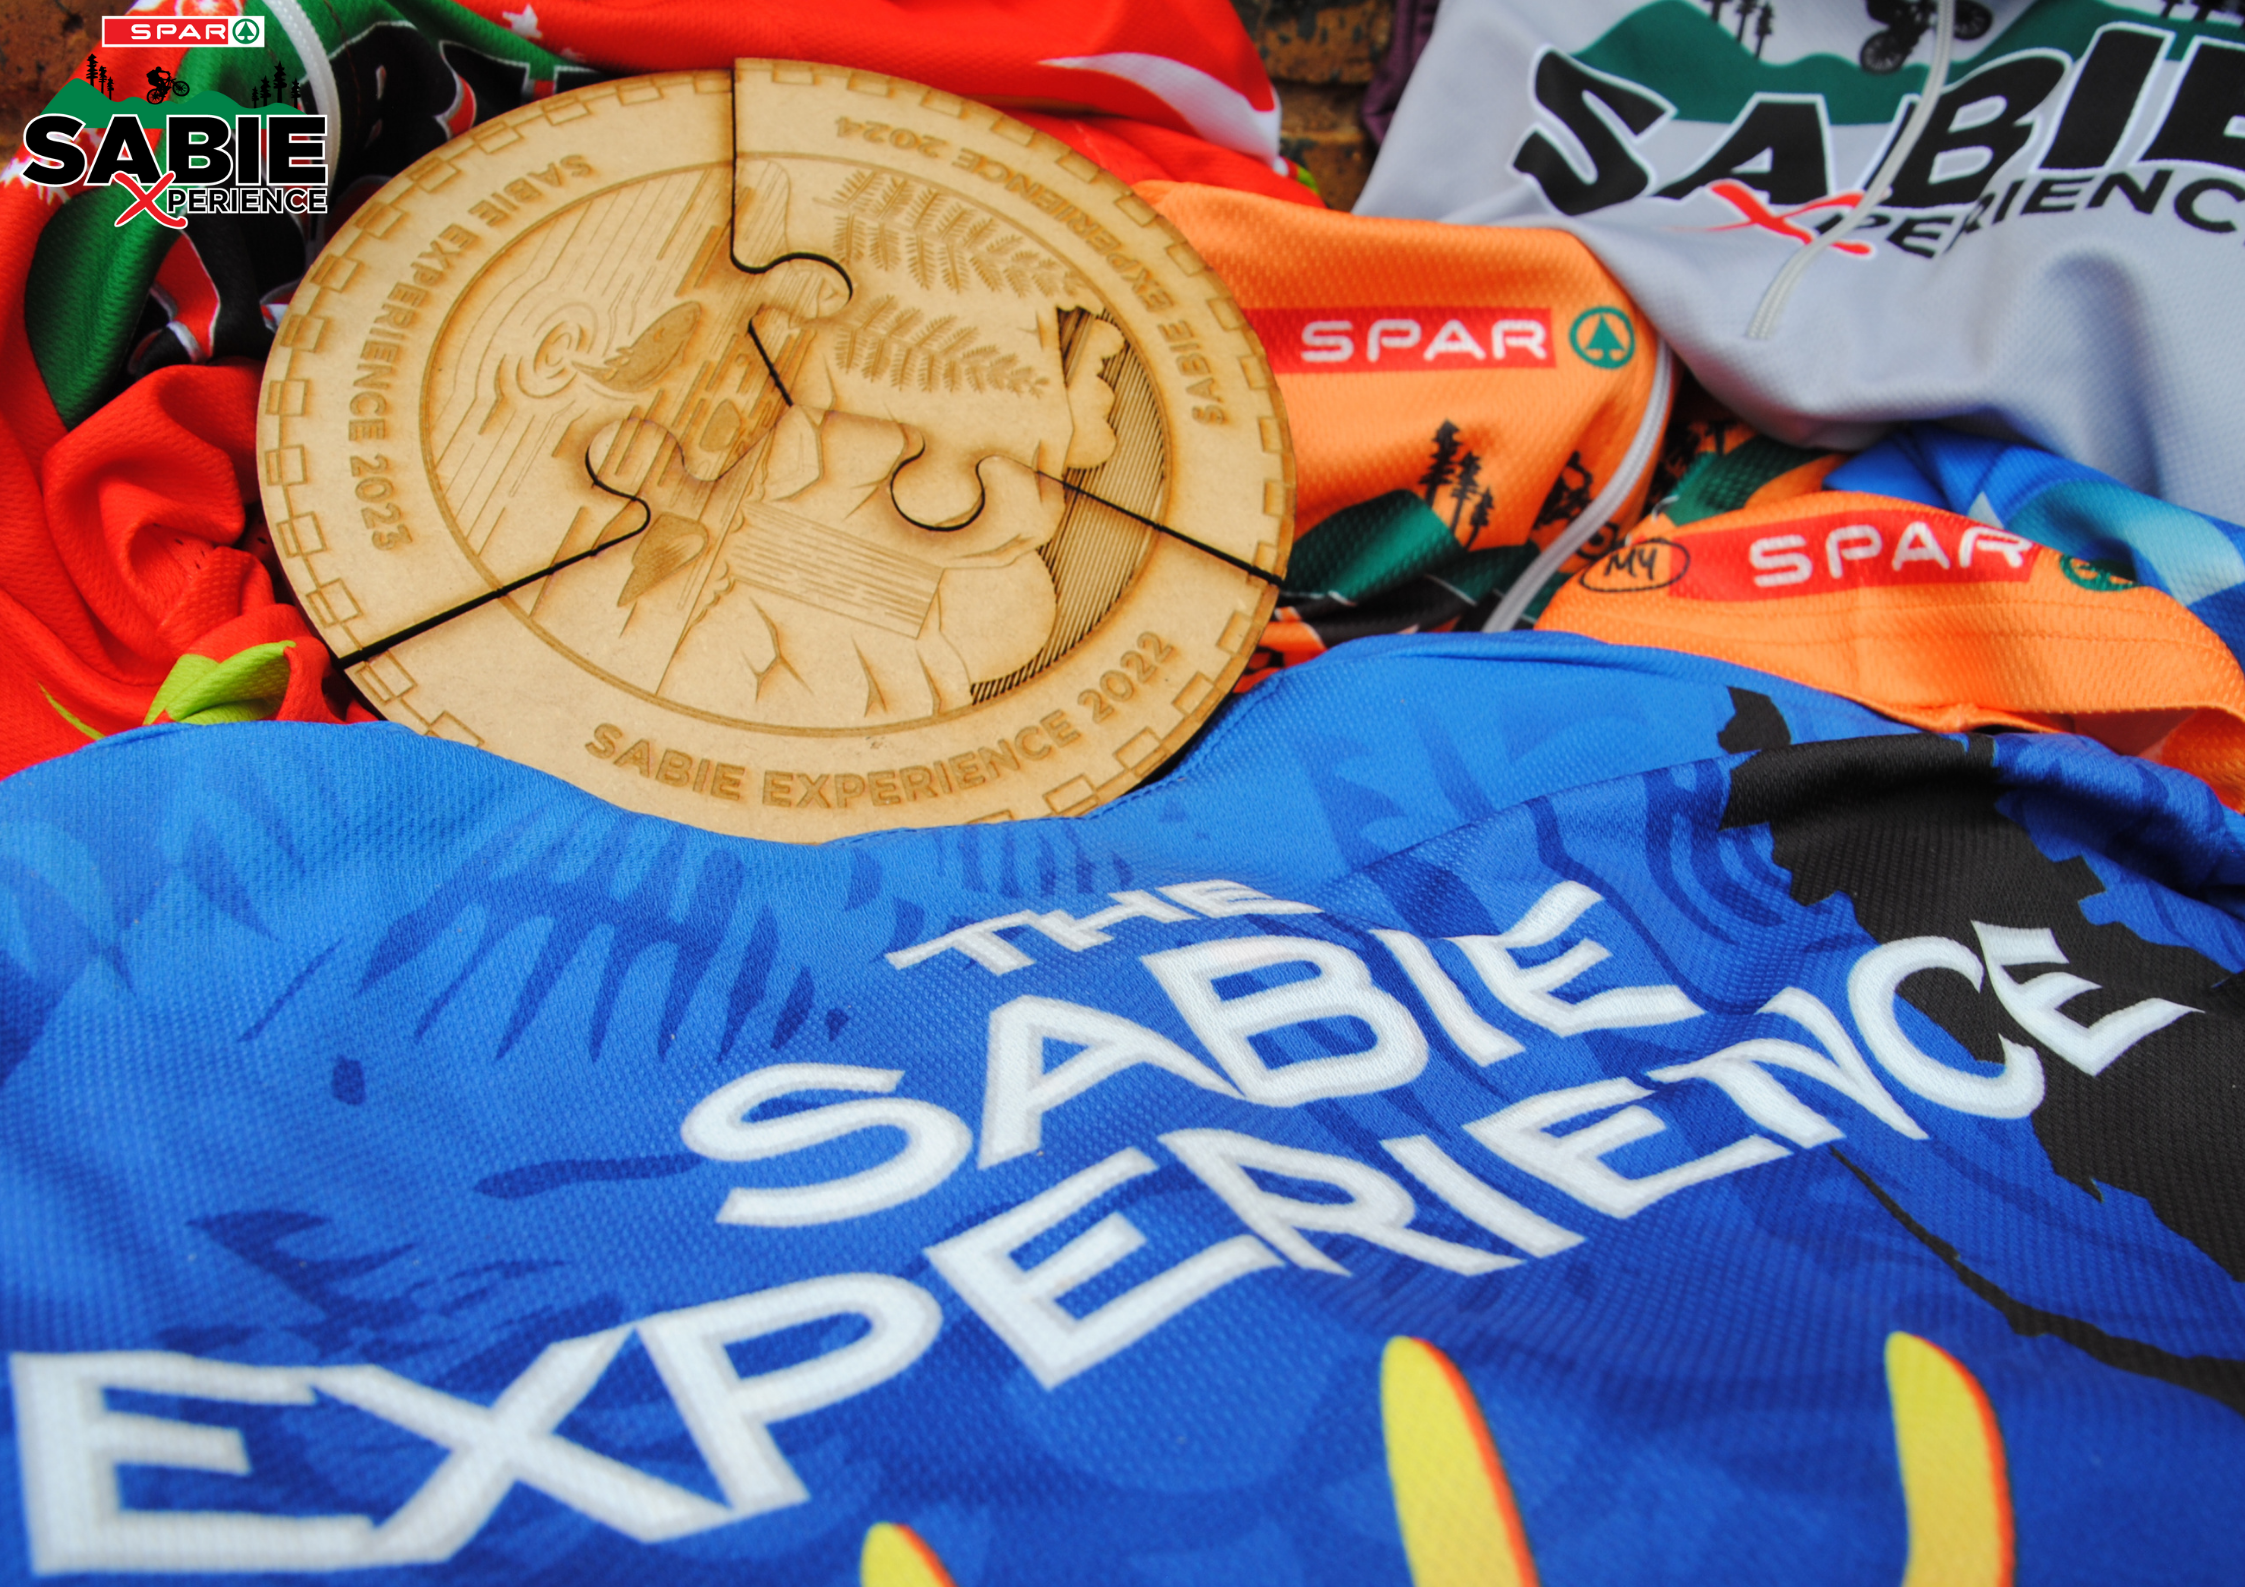 The Sabie Xperience Newsletter - March 2022